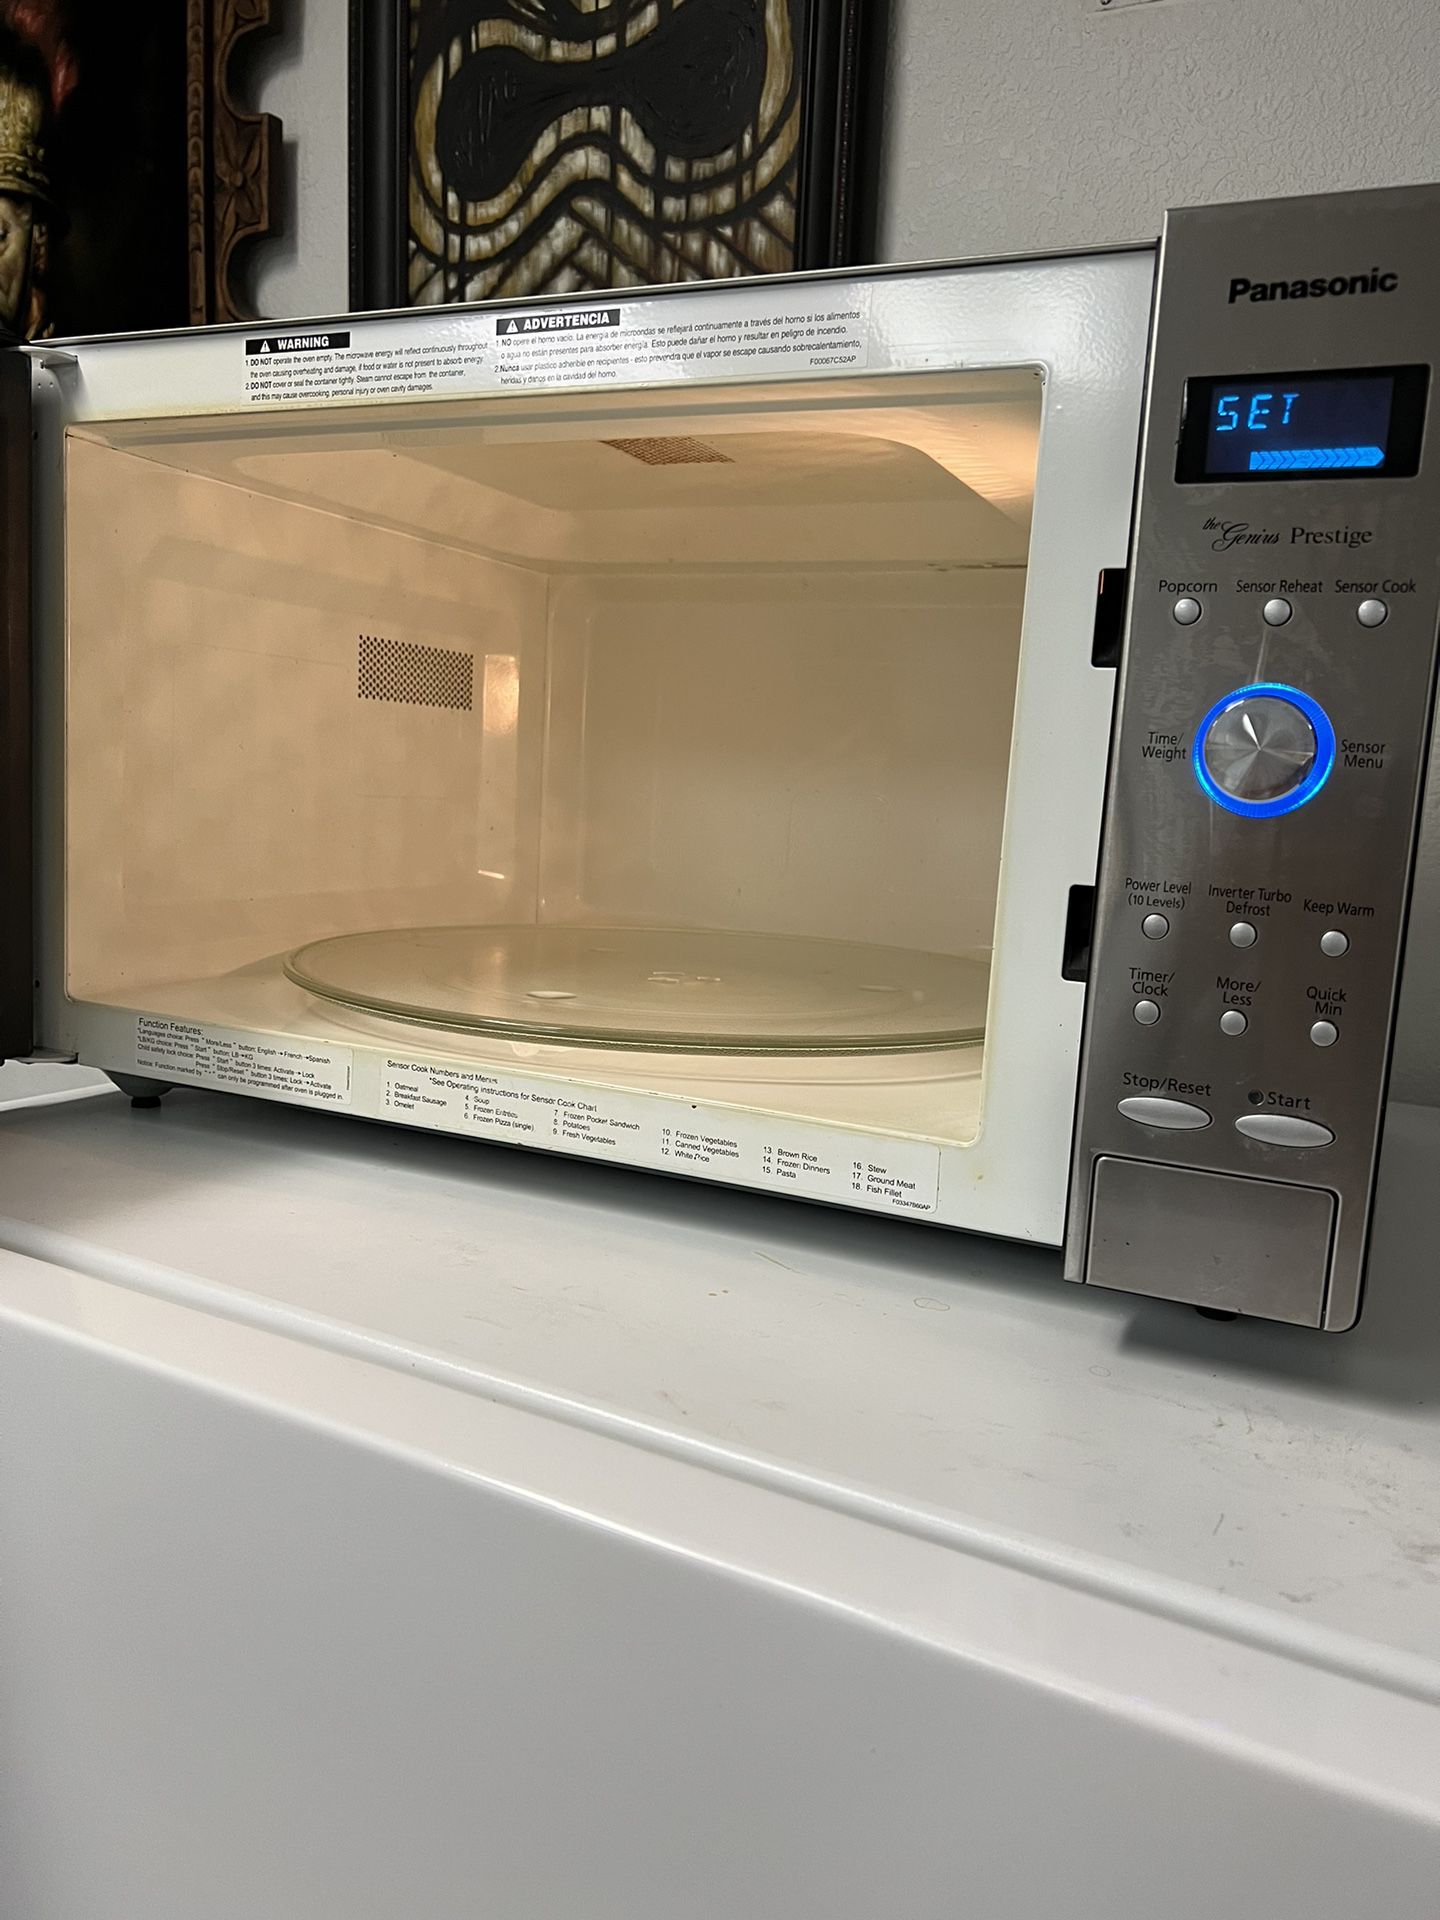 Panasonic Microwave, Porch Pick Up Only